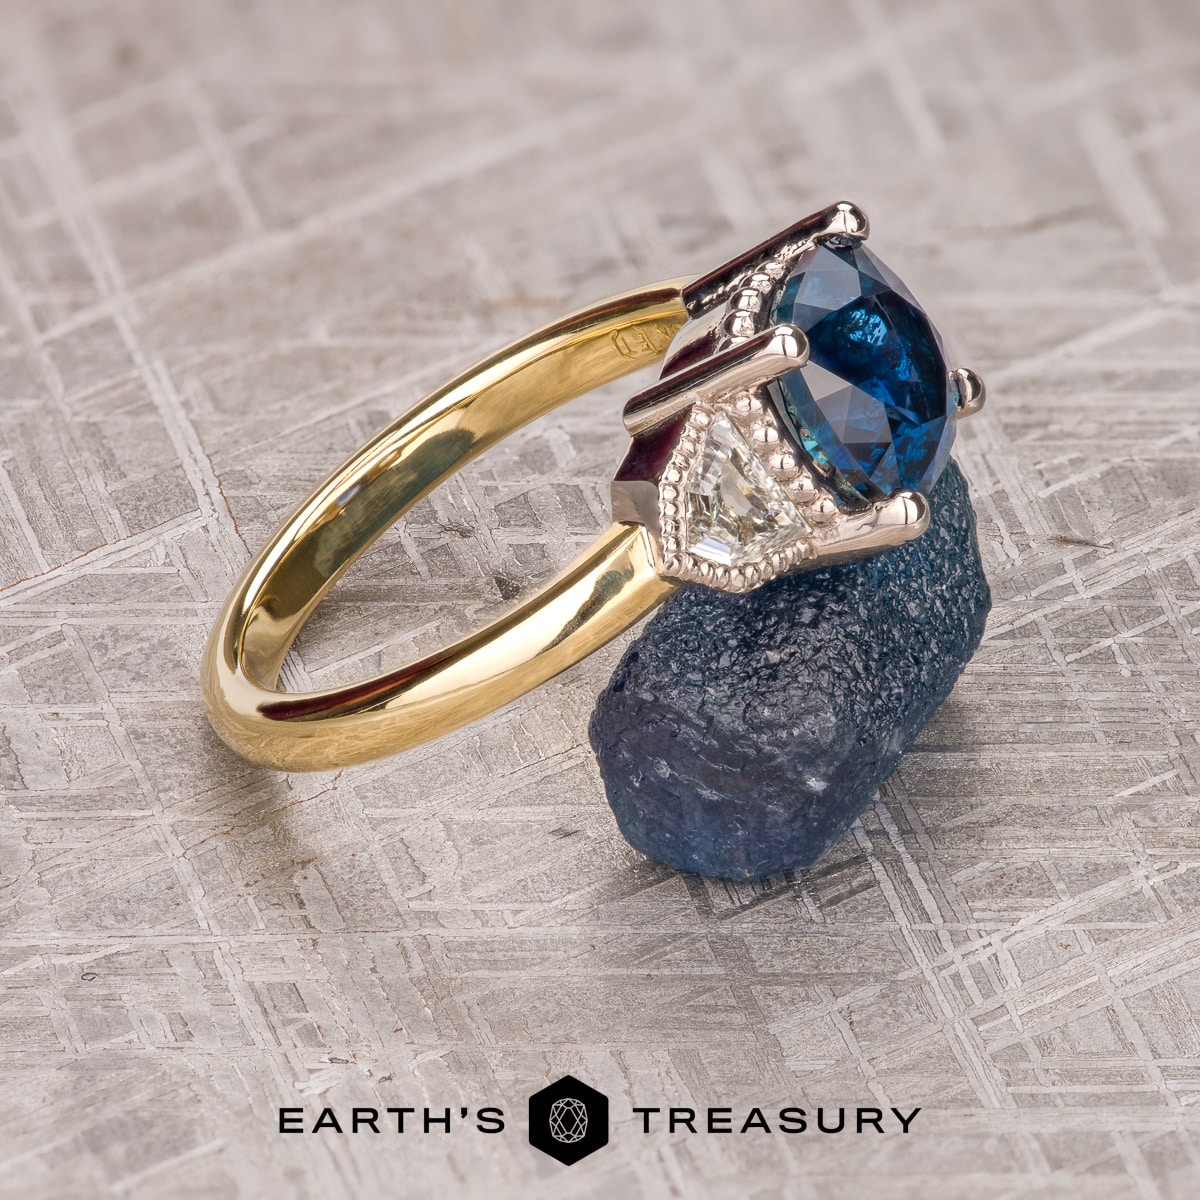 The "Celaeno" 3-Stone Ring in 18k yellow gold and platinum with 3.87-carat Montana sapphire